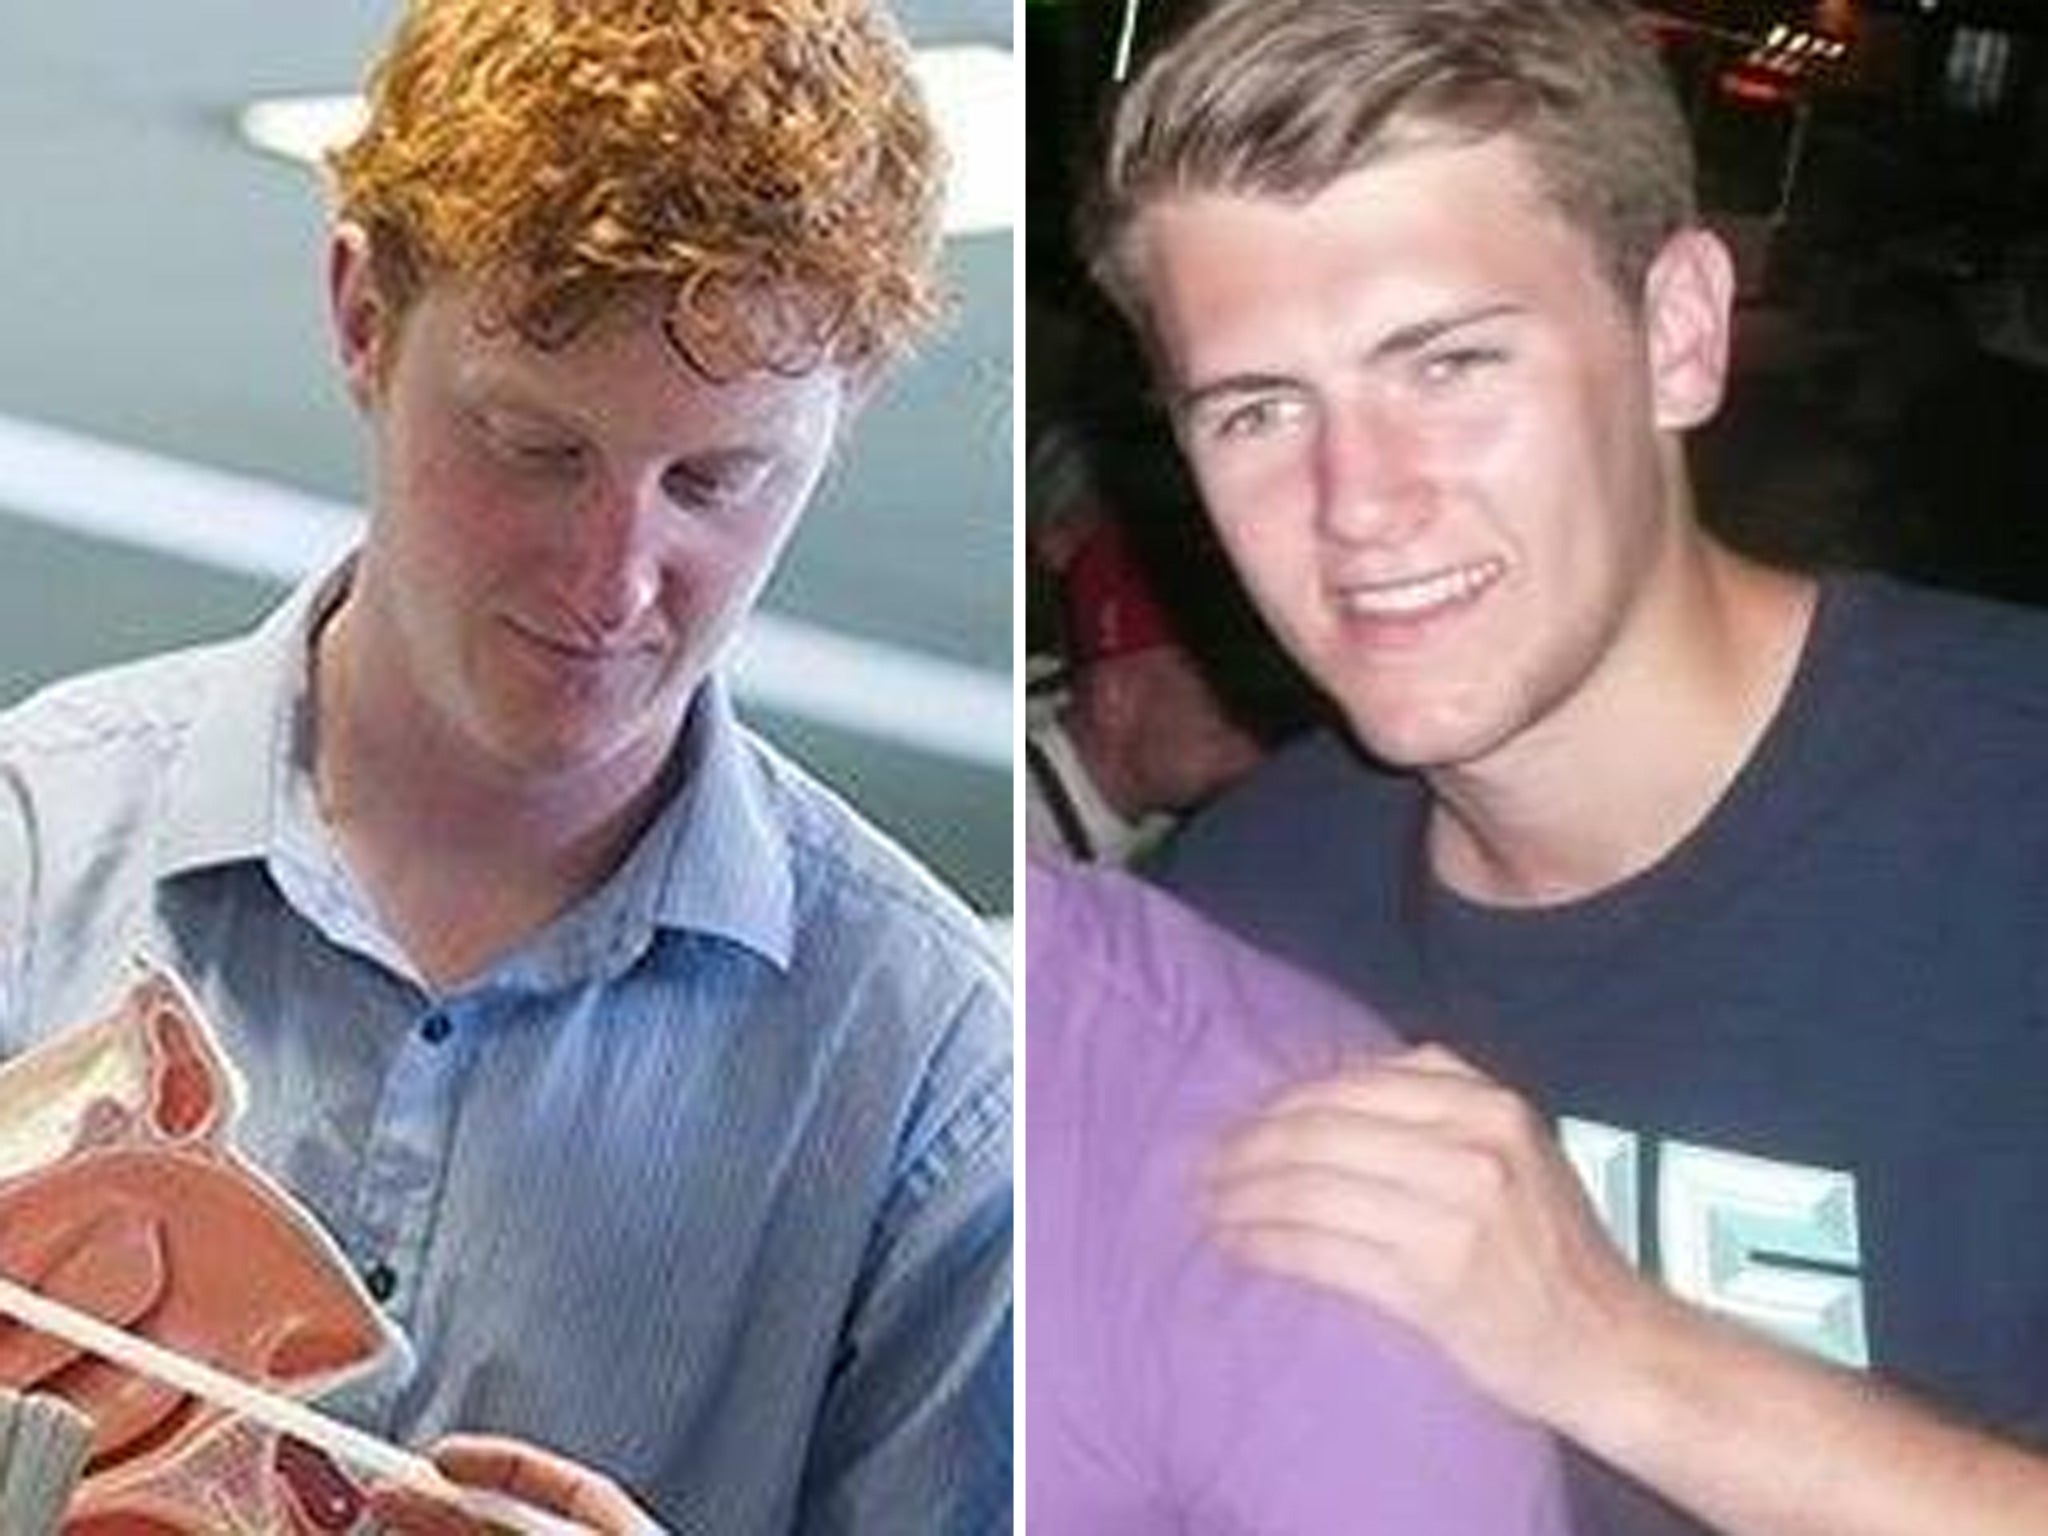 Neil Dalton and Aidan Brunger, both 22, were fourth-year medical students at Newcastle University